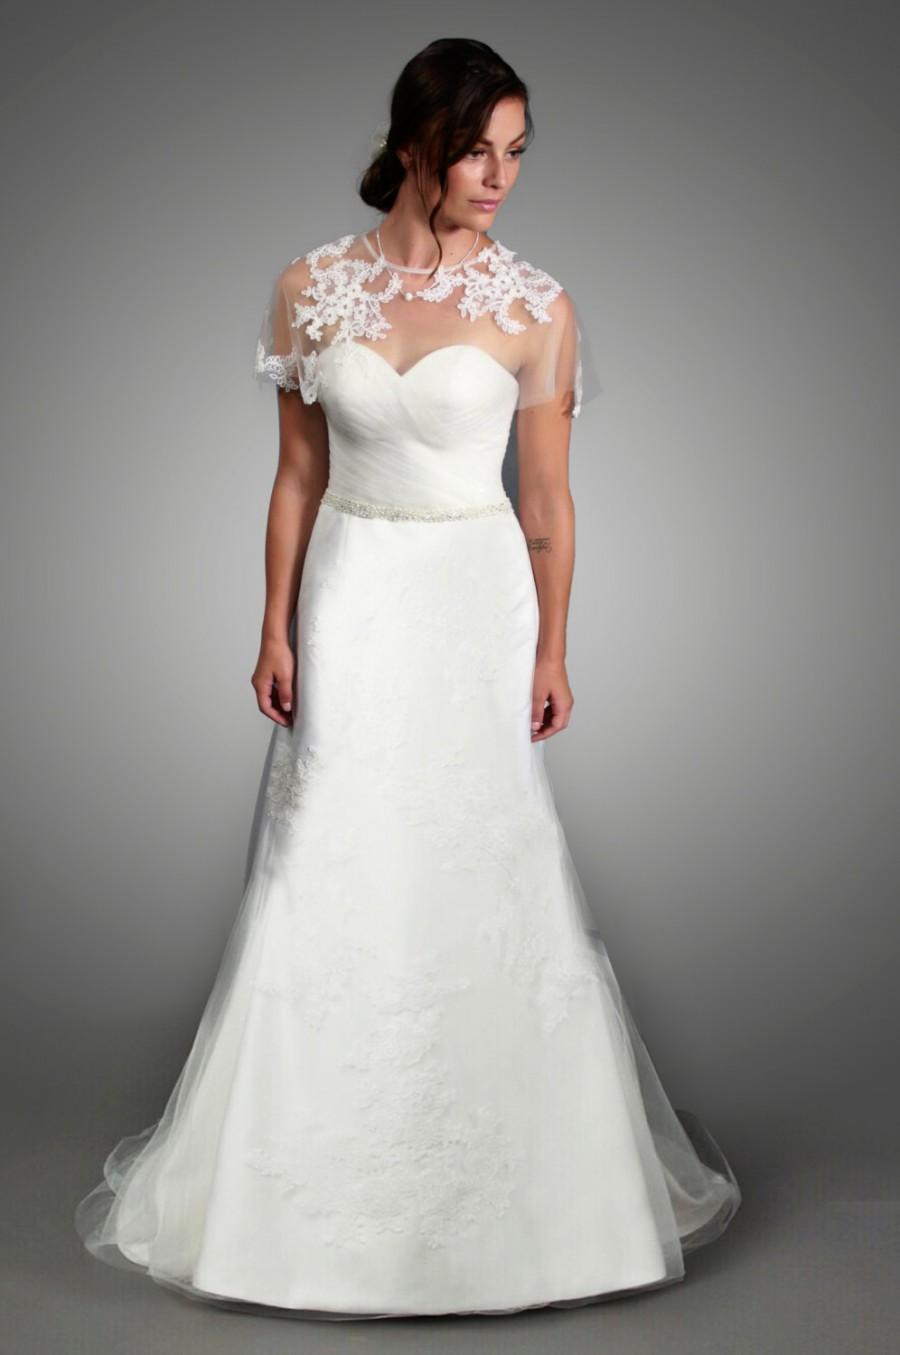 Wedding - Elegant White A Line Sweetheart Lace Applique featured with crystal belt and detachable lace bolero